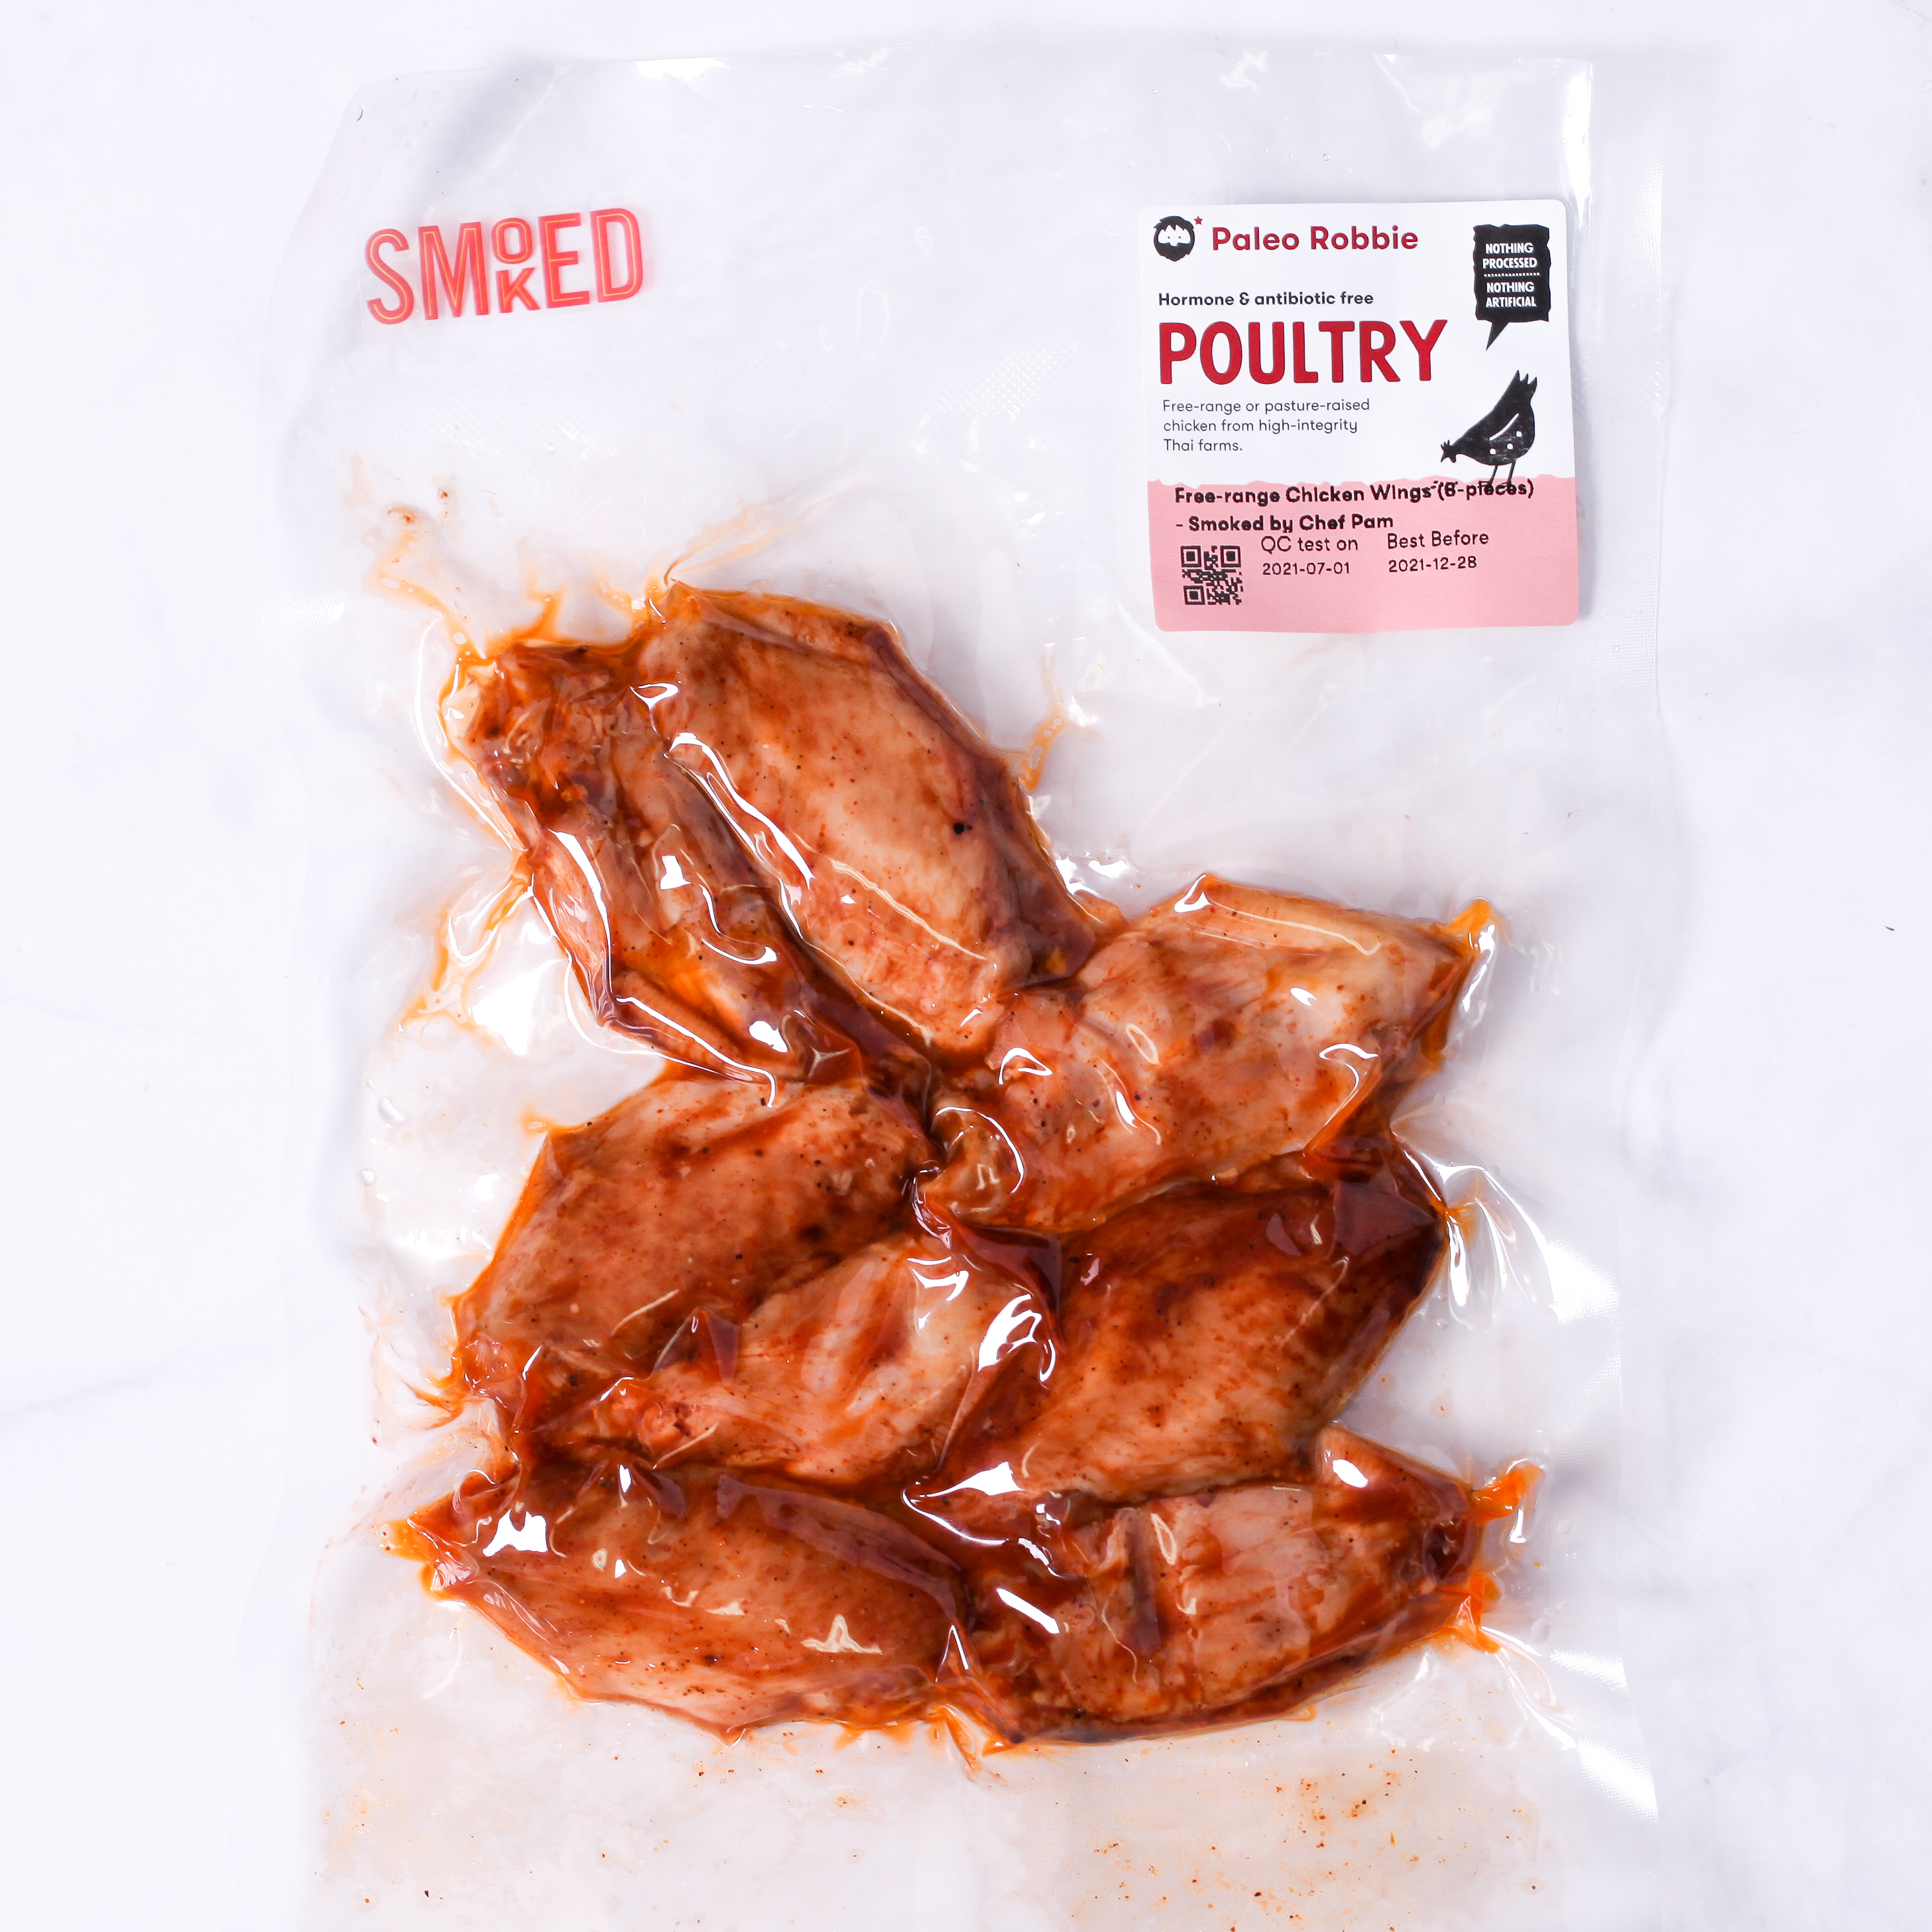 Free-range Chicken Wings (8-pieces) - Smoked by Chef Pam